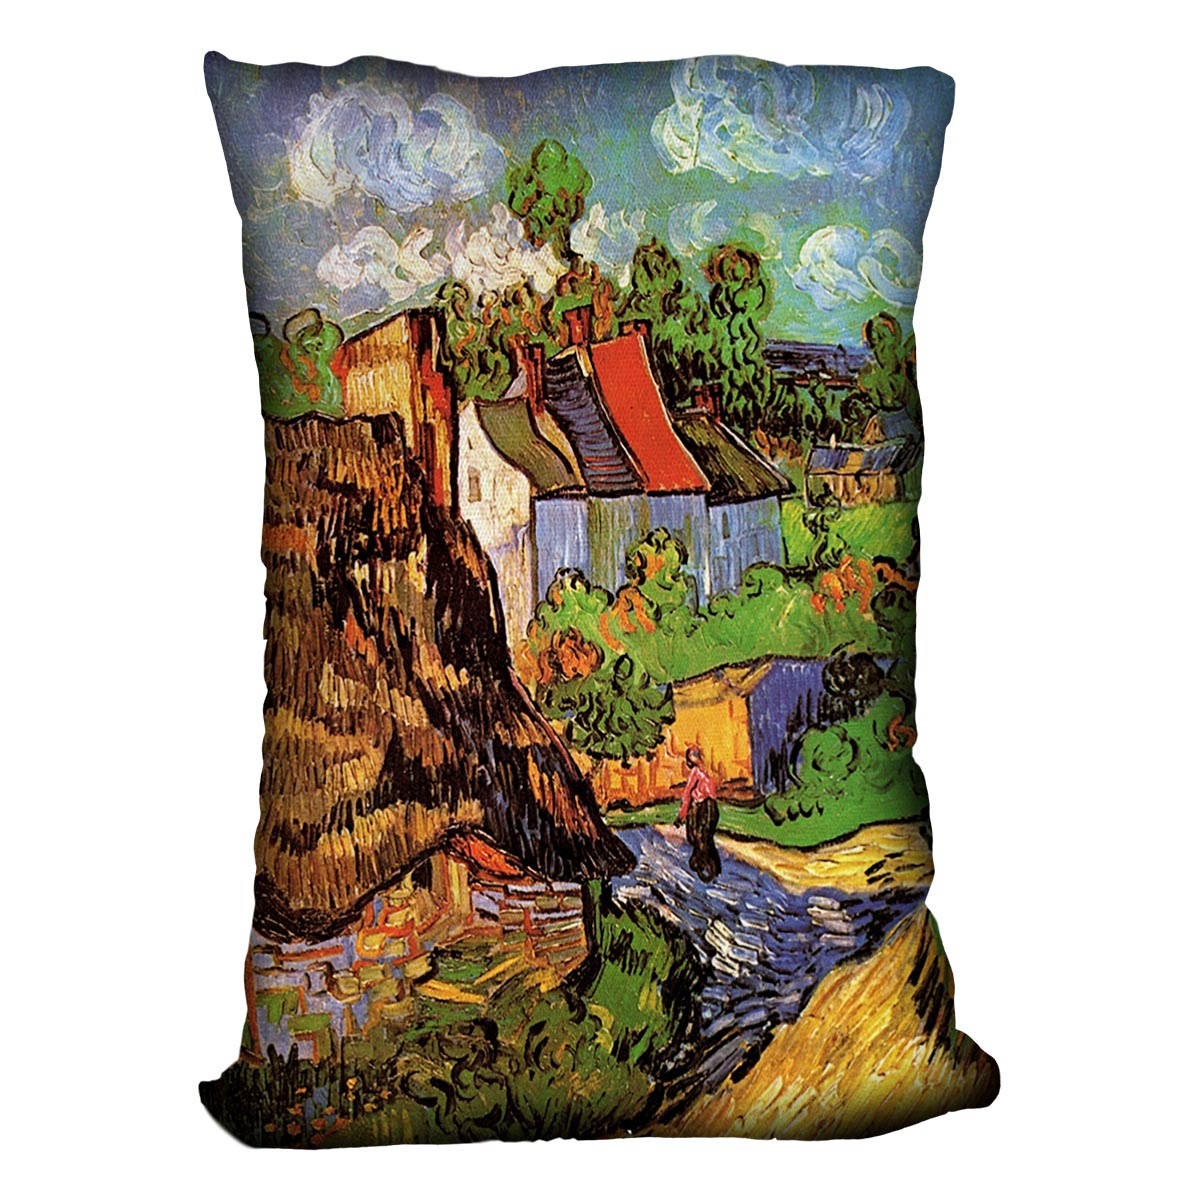 Houses in Auvers by Van Gogh Cushion